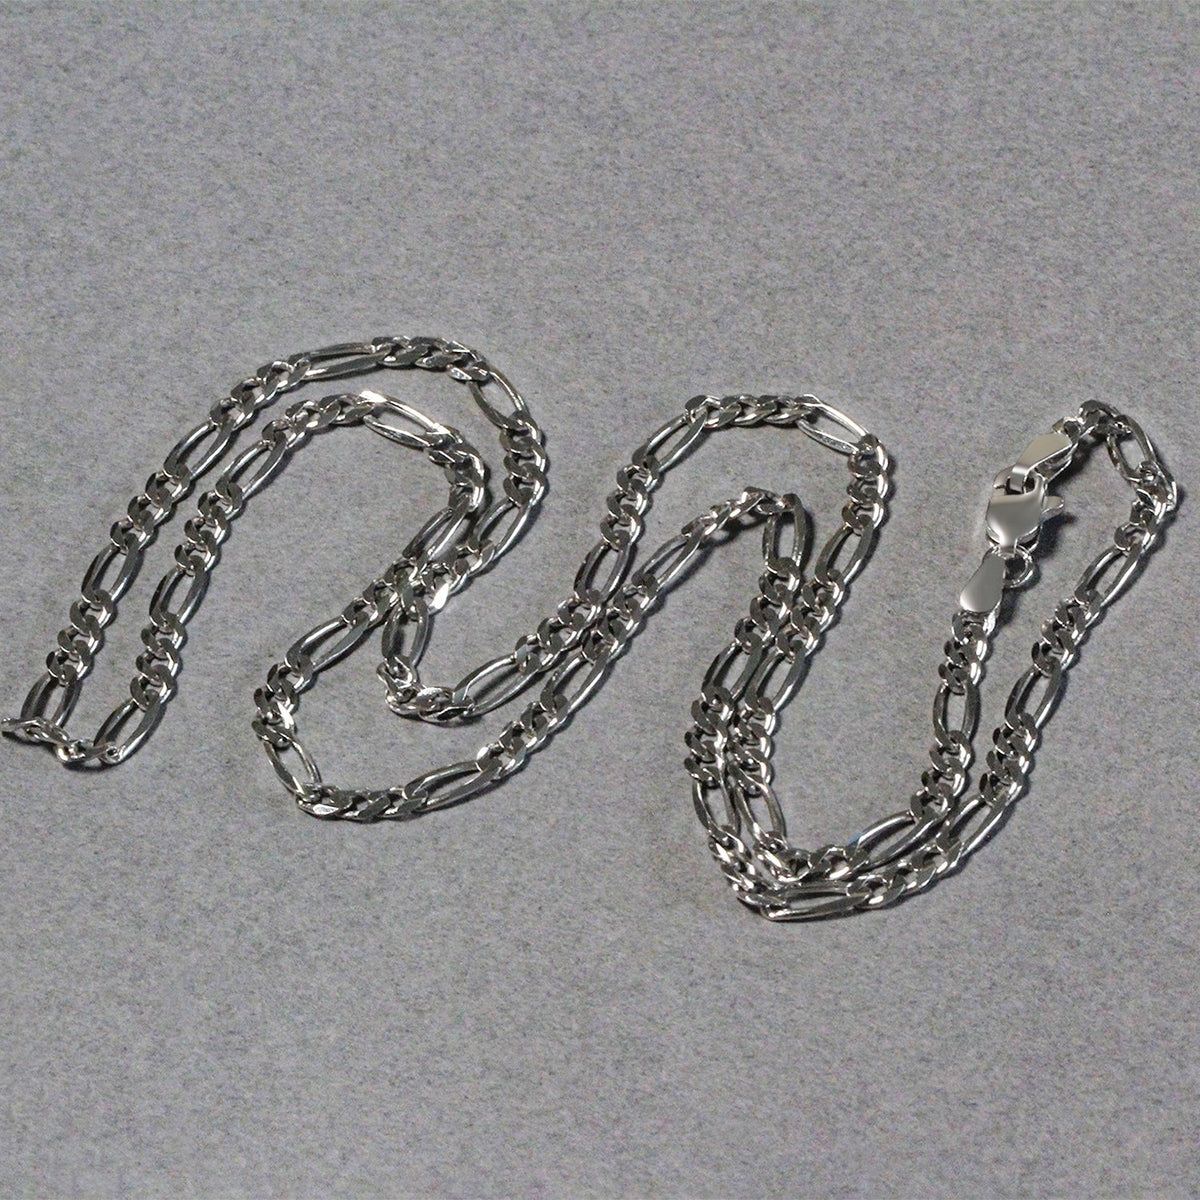 3.0mm 14k White Gold Solid Figaro Chain